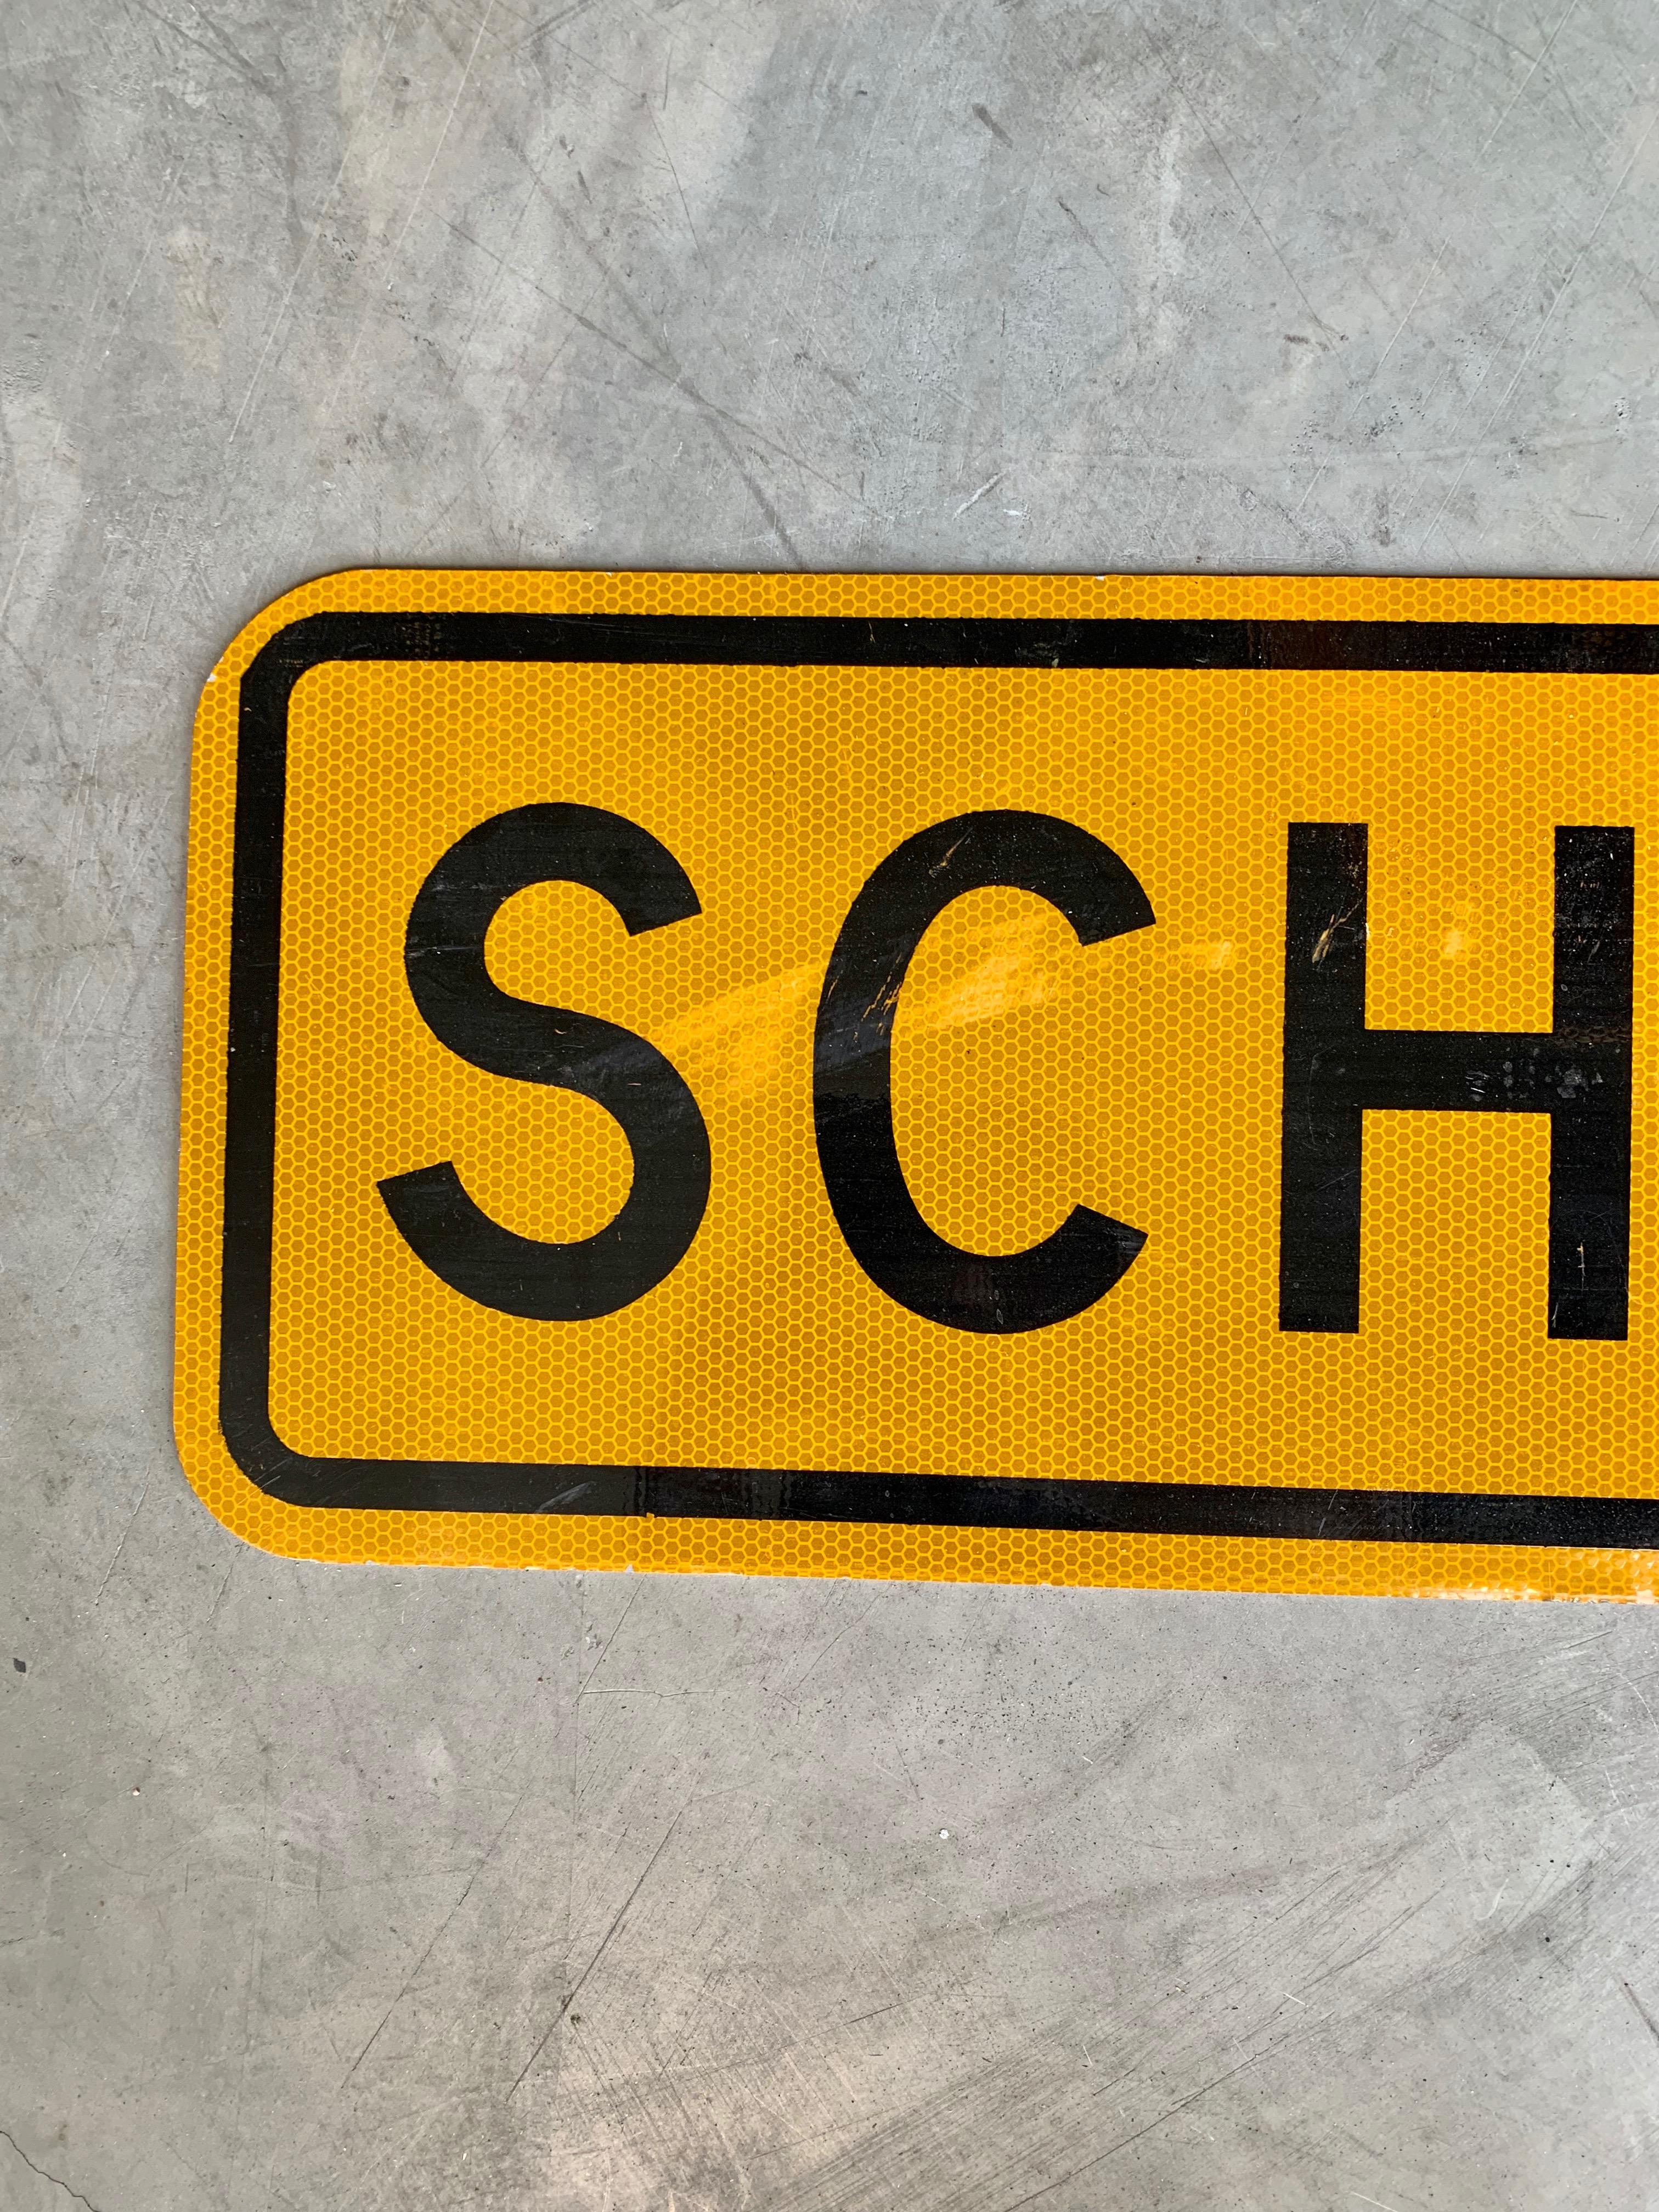 Vintage 'SCHOOL' street sign with yellow background and black lettering. Good vintage condition.